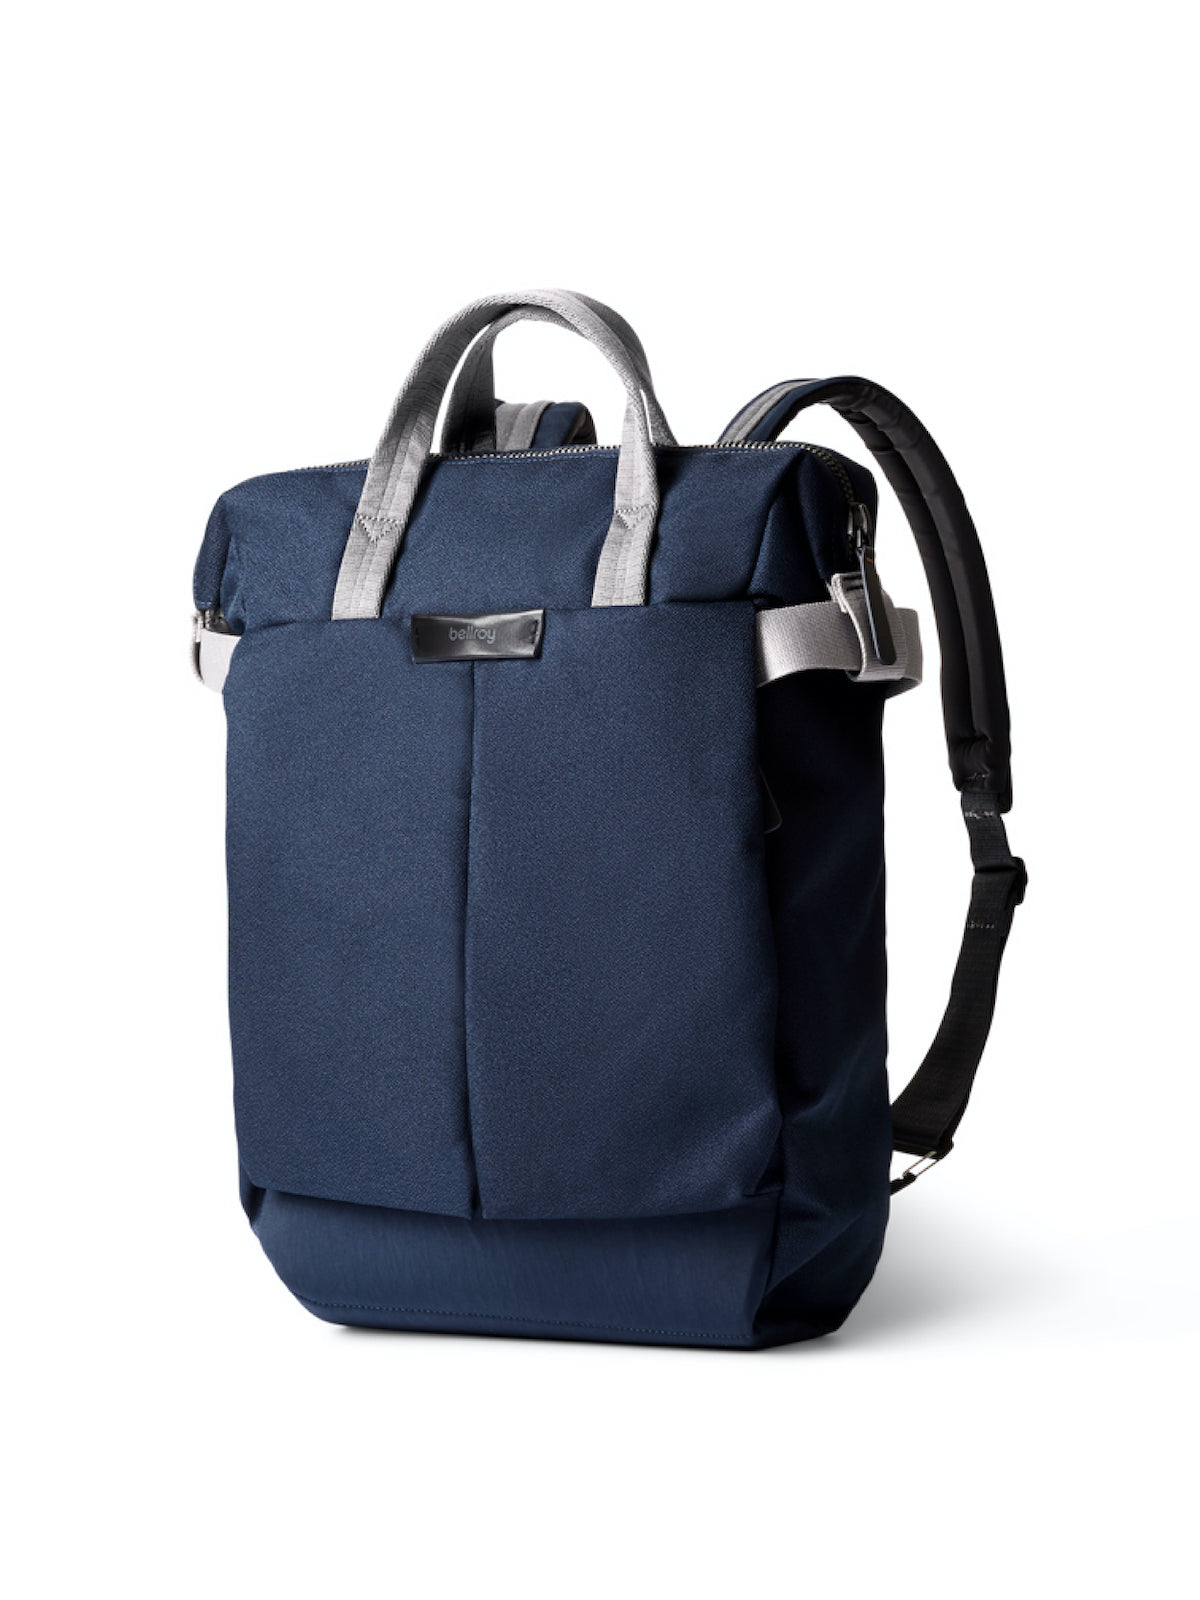 Bellroy Tokyo Totepack Compact Navy